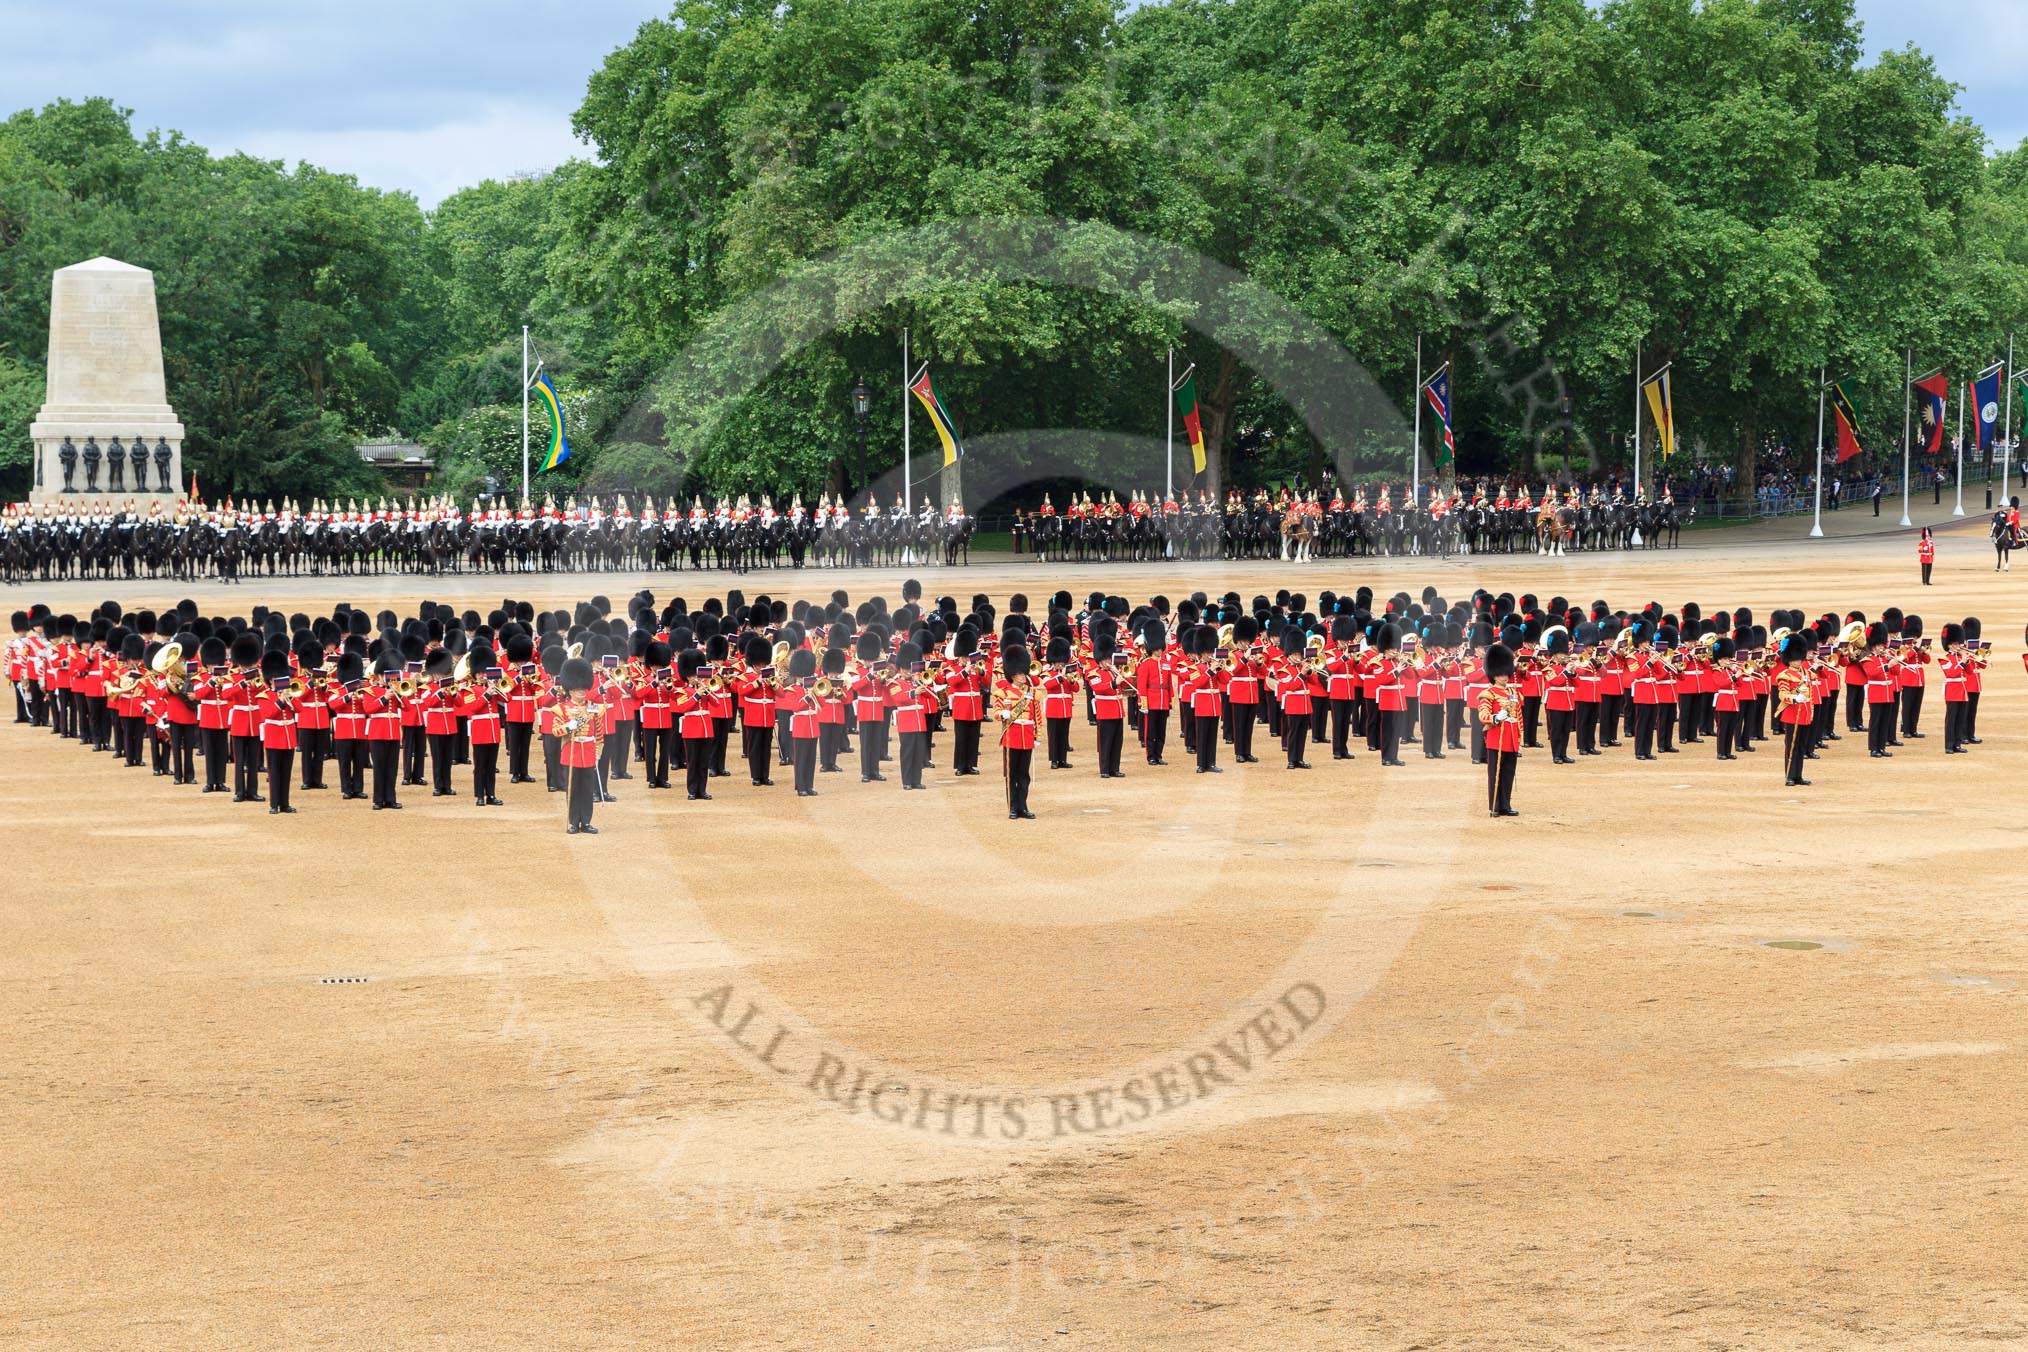 during The Colonel's Review {iptcyear4} (final rehearsal for Trooping the Colour, The Queen's Birthday Parade)  at Horse Guards Parade, Westminster, London, 2 June 2018, 11:41.